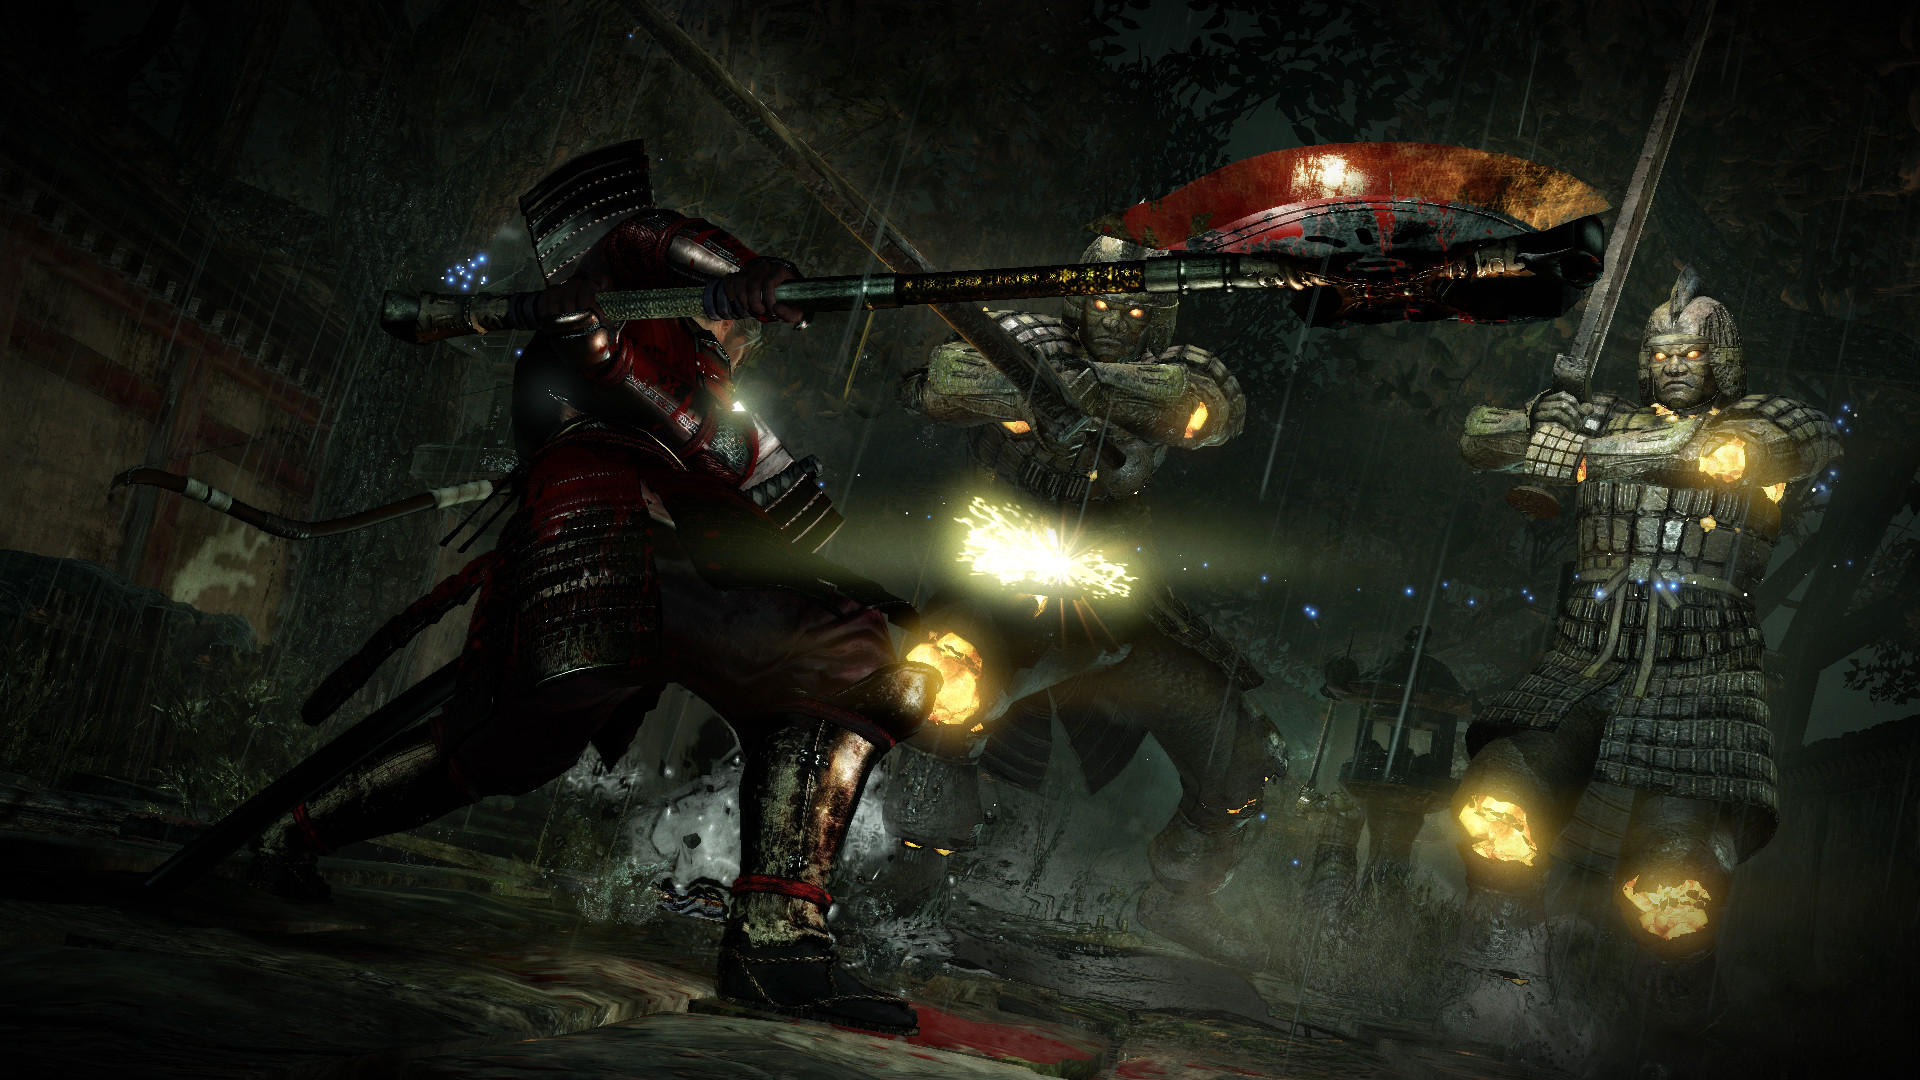 Ps4 Exclusive Nioh Gets New Official 1080p Screenshots And Info To Celebrate The Demo 1920x1080